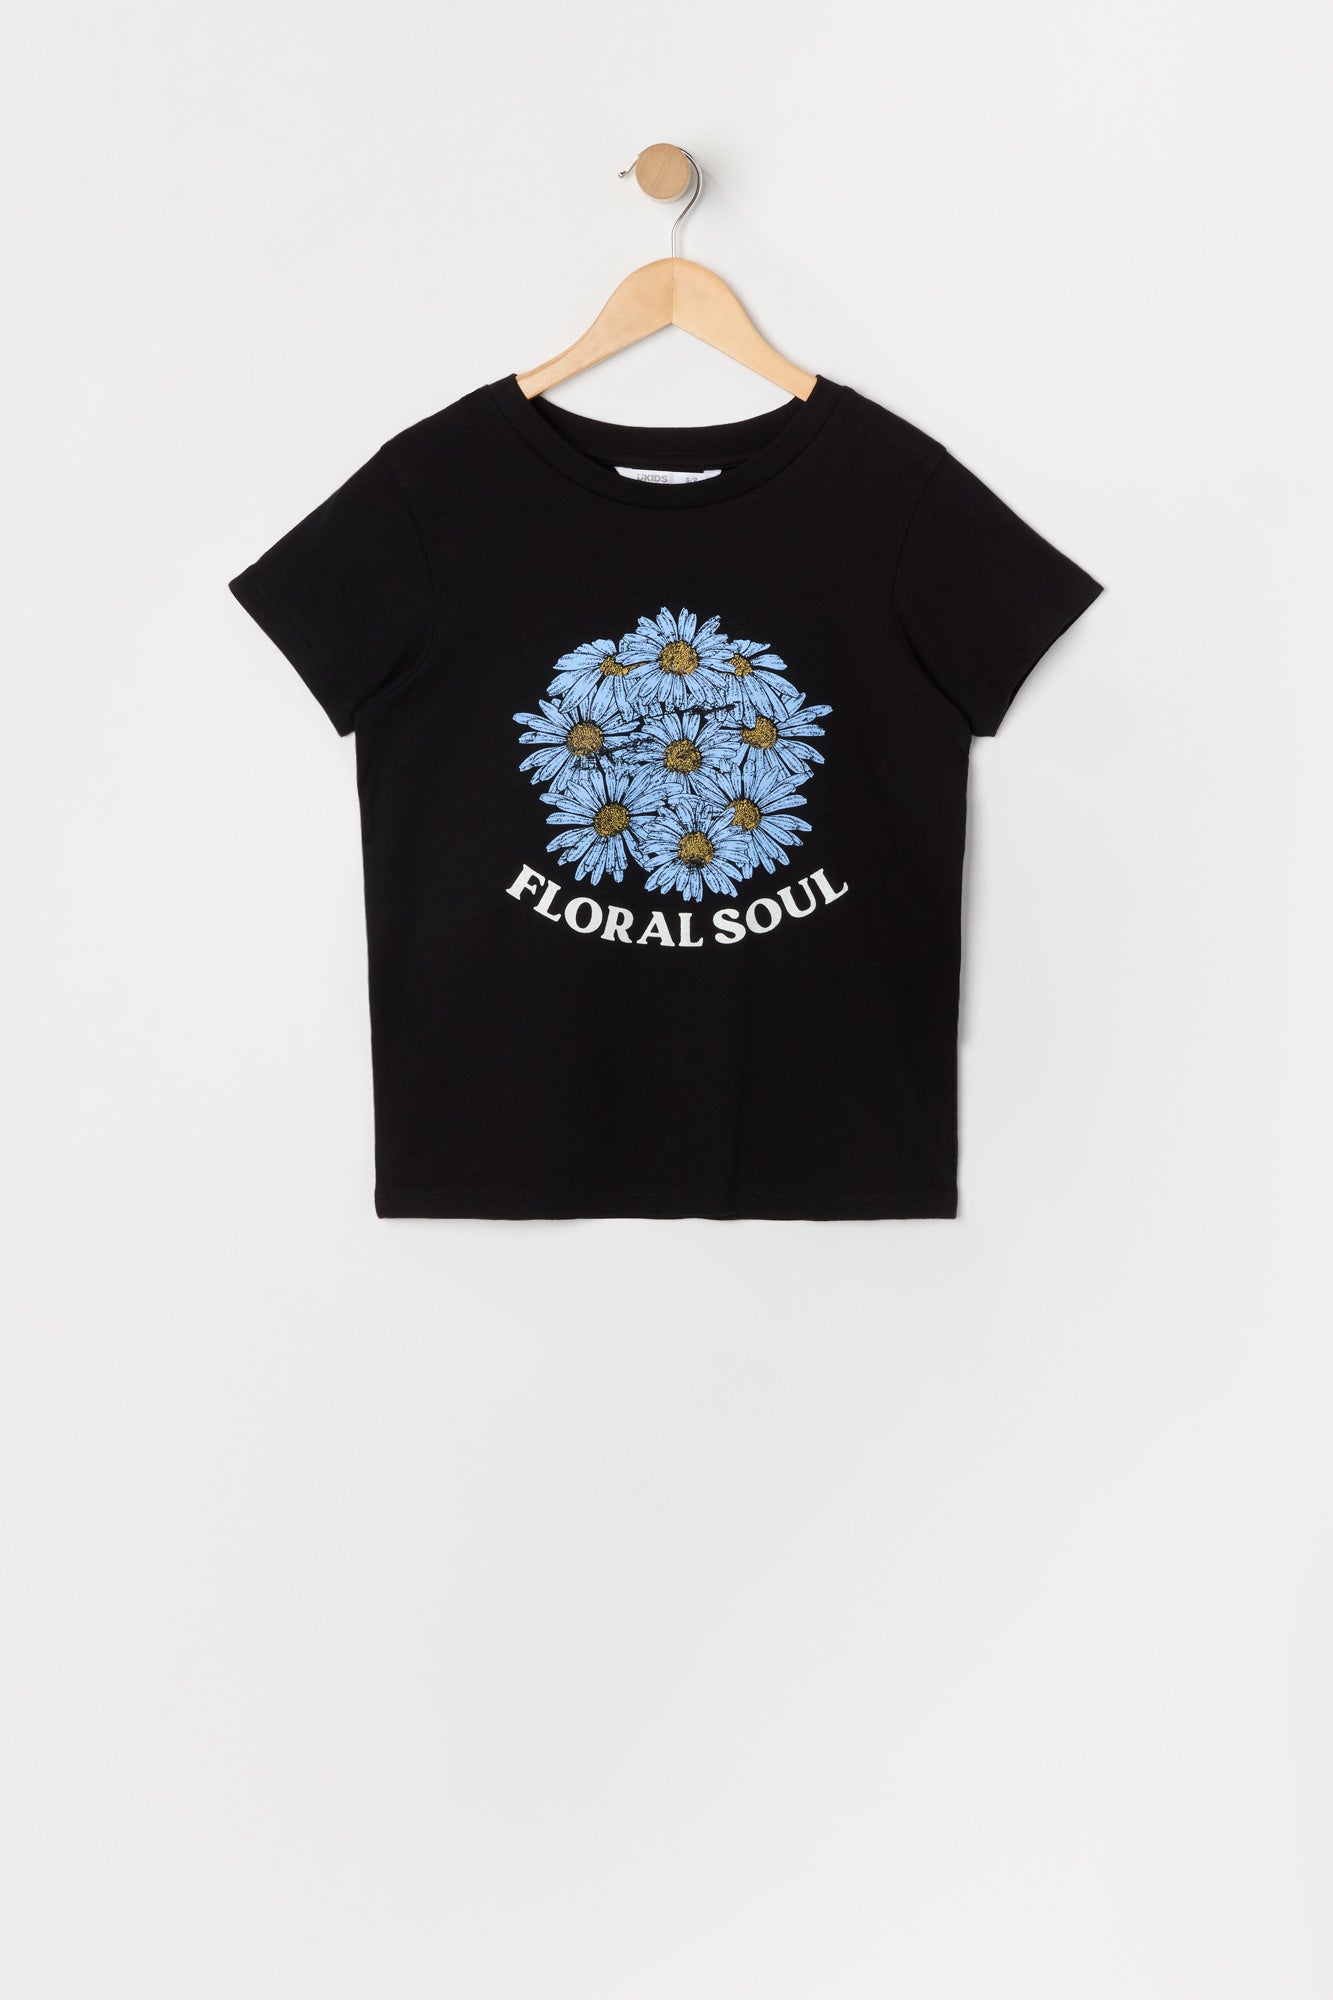 Girls Floral Soul Graphic T-Shirt